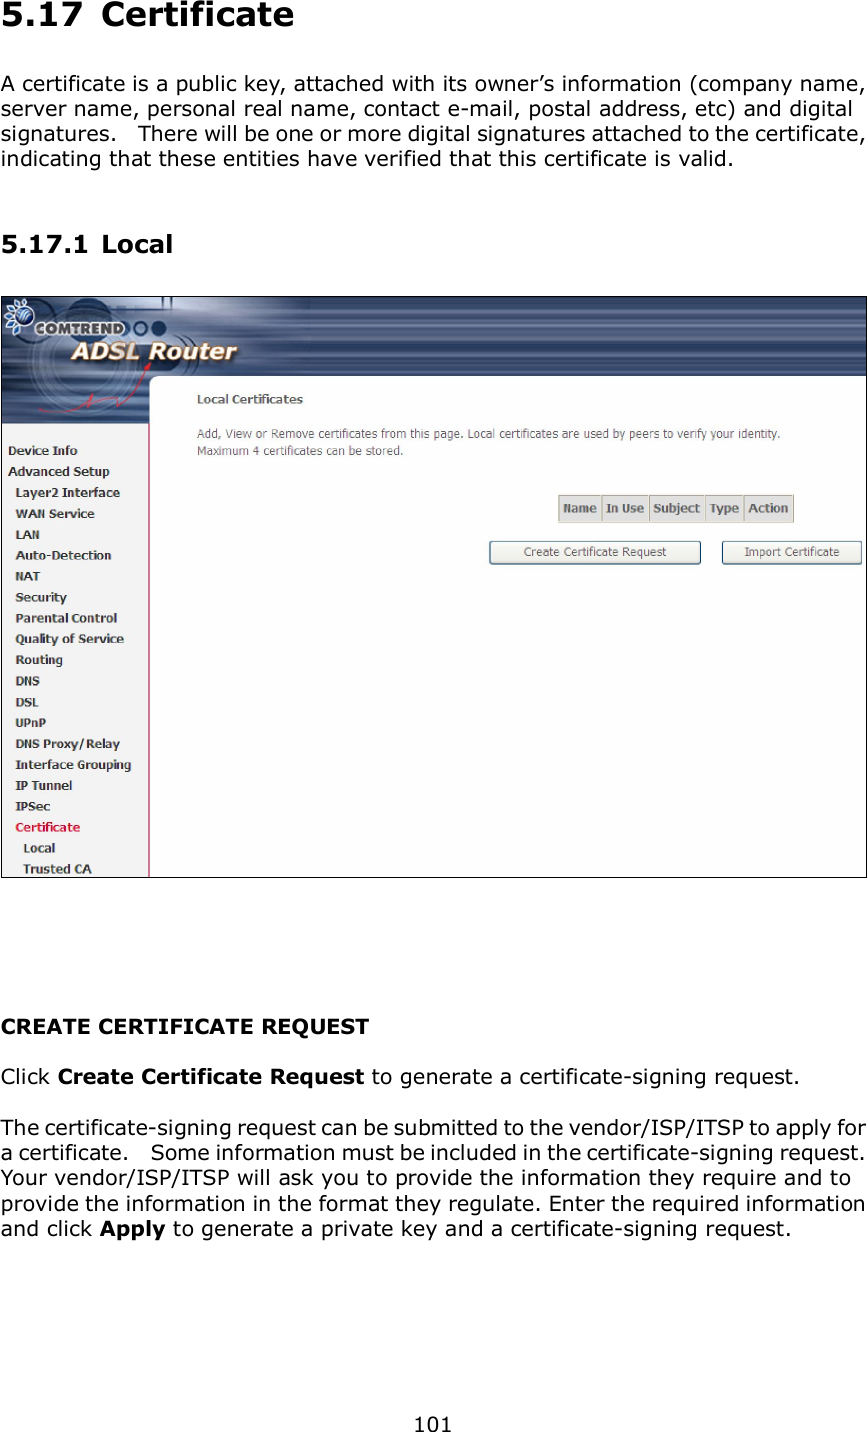  101 5.17  Certificate A certificate is a public key, attached with its owner’s information (company name, server name, personal real name, contact e-mail, postal address, etc) and digital signatures.   There will be one or more digital signatures attached to the certificate, indicating that these entities have verified that this certificate is valid. 5.17.1 Local    CREATE CERTIFICATE REQUEST  Click Create Certificate Request to generate a certificate-signing request.    The certificate-signing request can be submitted to the vendor/ISP/ITSP to apply for a certificate.    Some information must be included in the certificate-signing request.   Your vendor/ISP/ITSP will ask you to provide the information they require and to provide the information in the format they regulate. Enter the required information and click Apply to generate a private key and a certificate-signing request.      